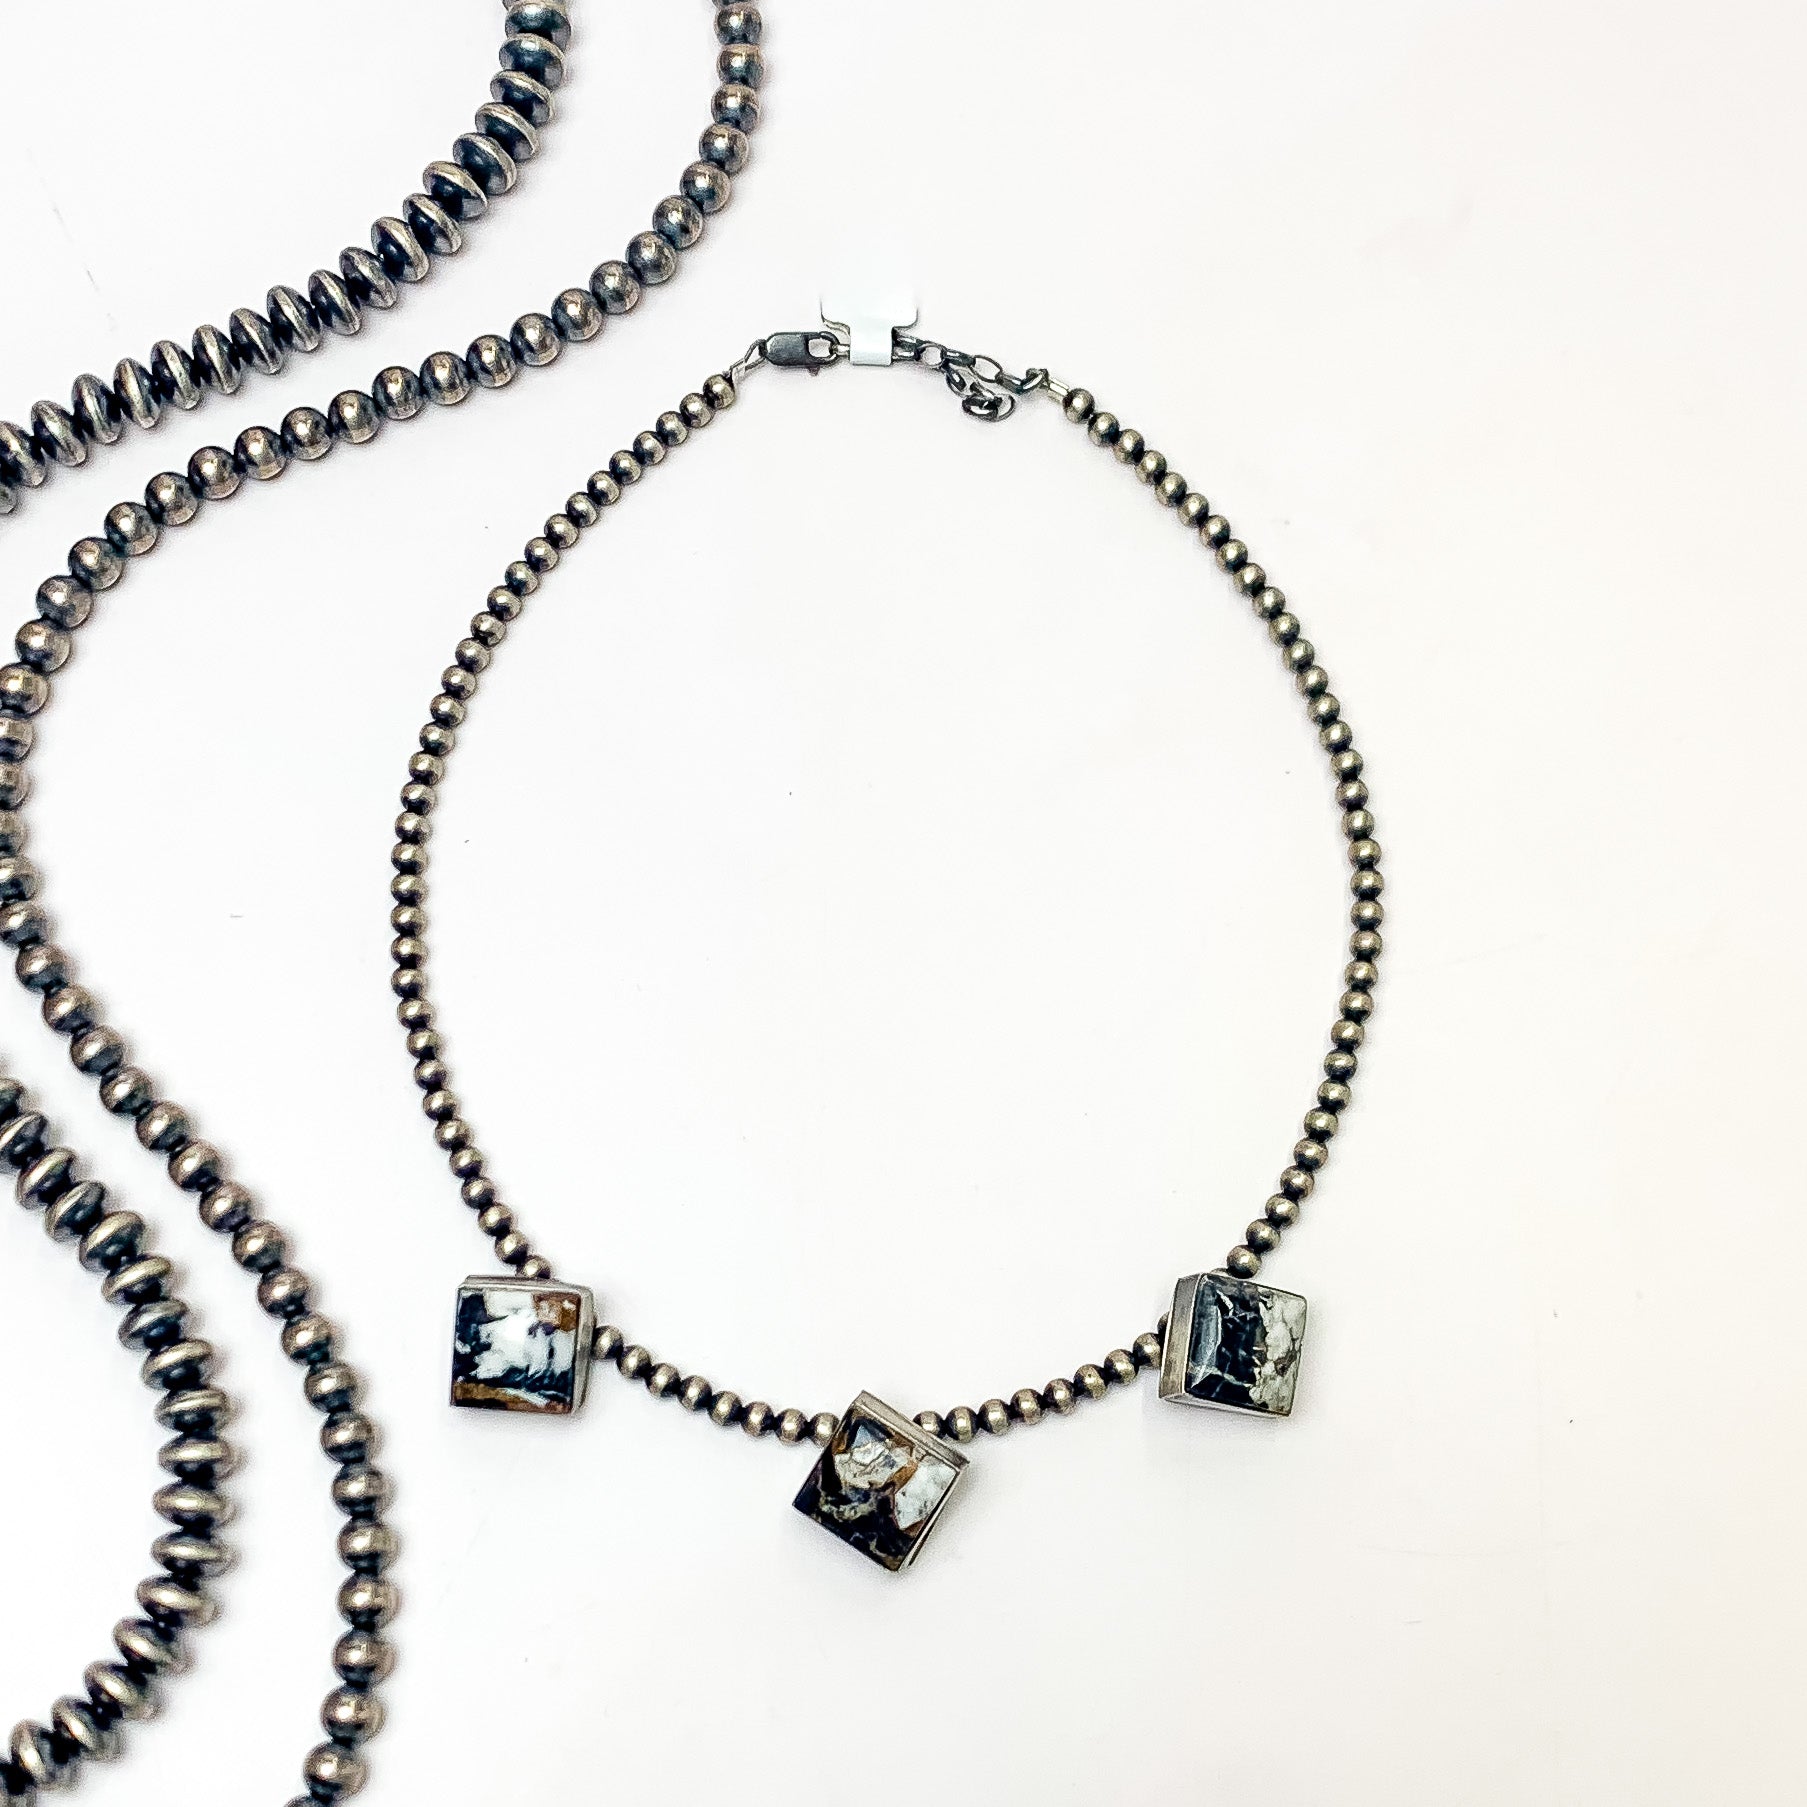 Pictured is a silver pearl beaded necklace with three diamond stones. These stones are white buffalo stones. This necklace is pictured on a white background with silver beads on the left side. 